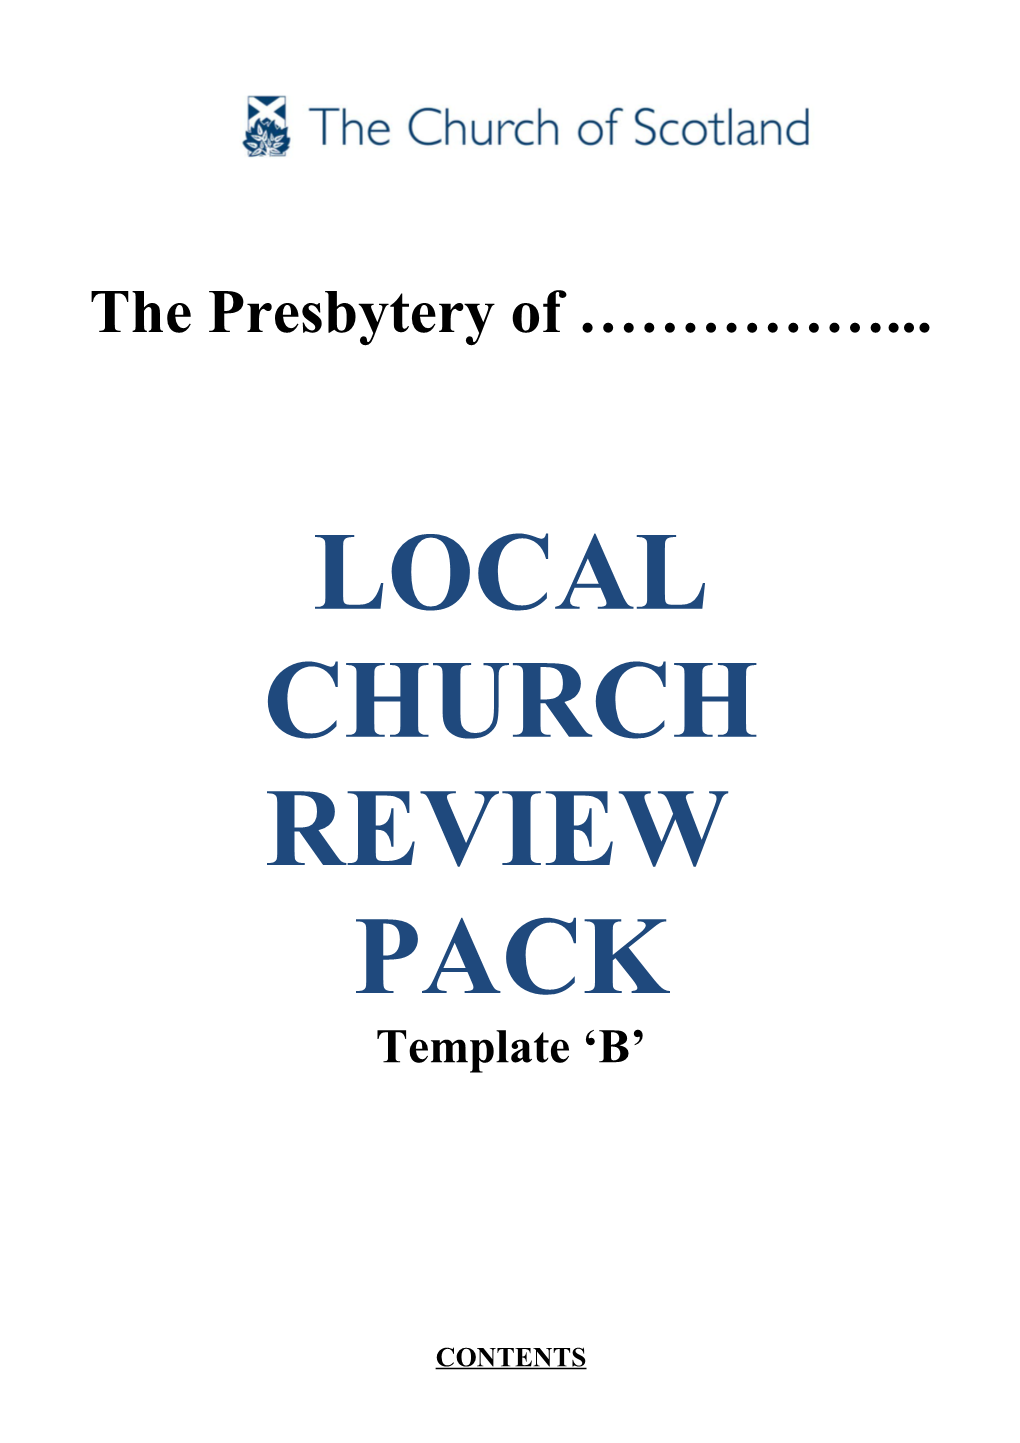 THE PRESBYTERY of LOCAL CHURCH REVIEW Template B